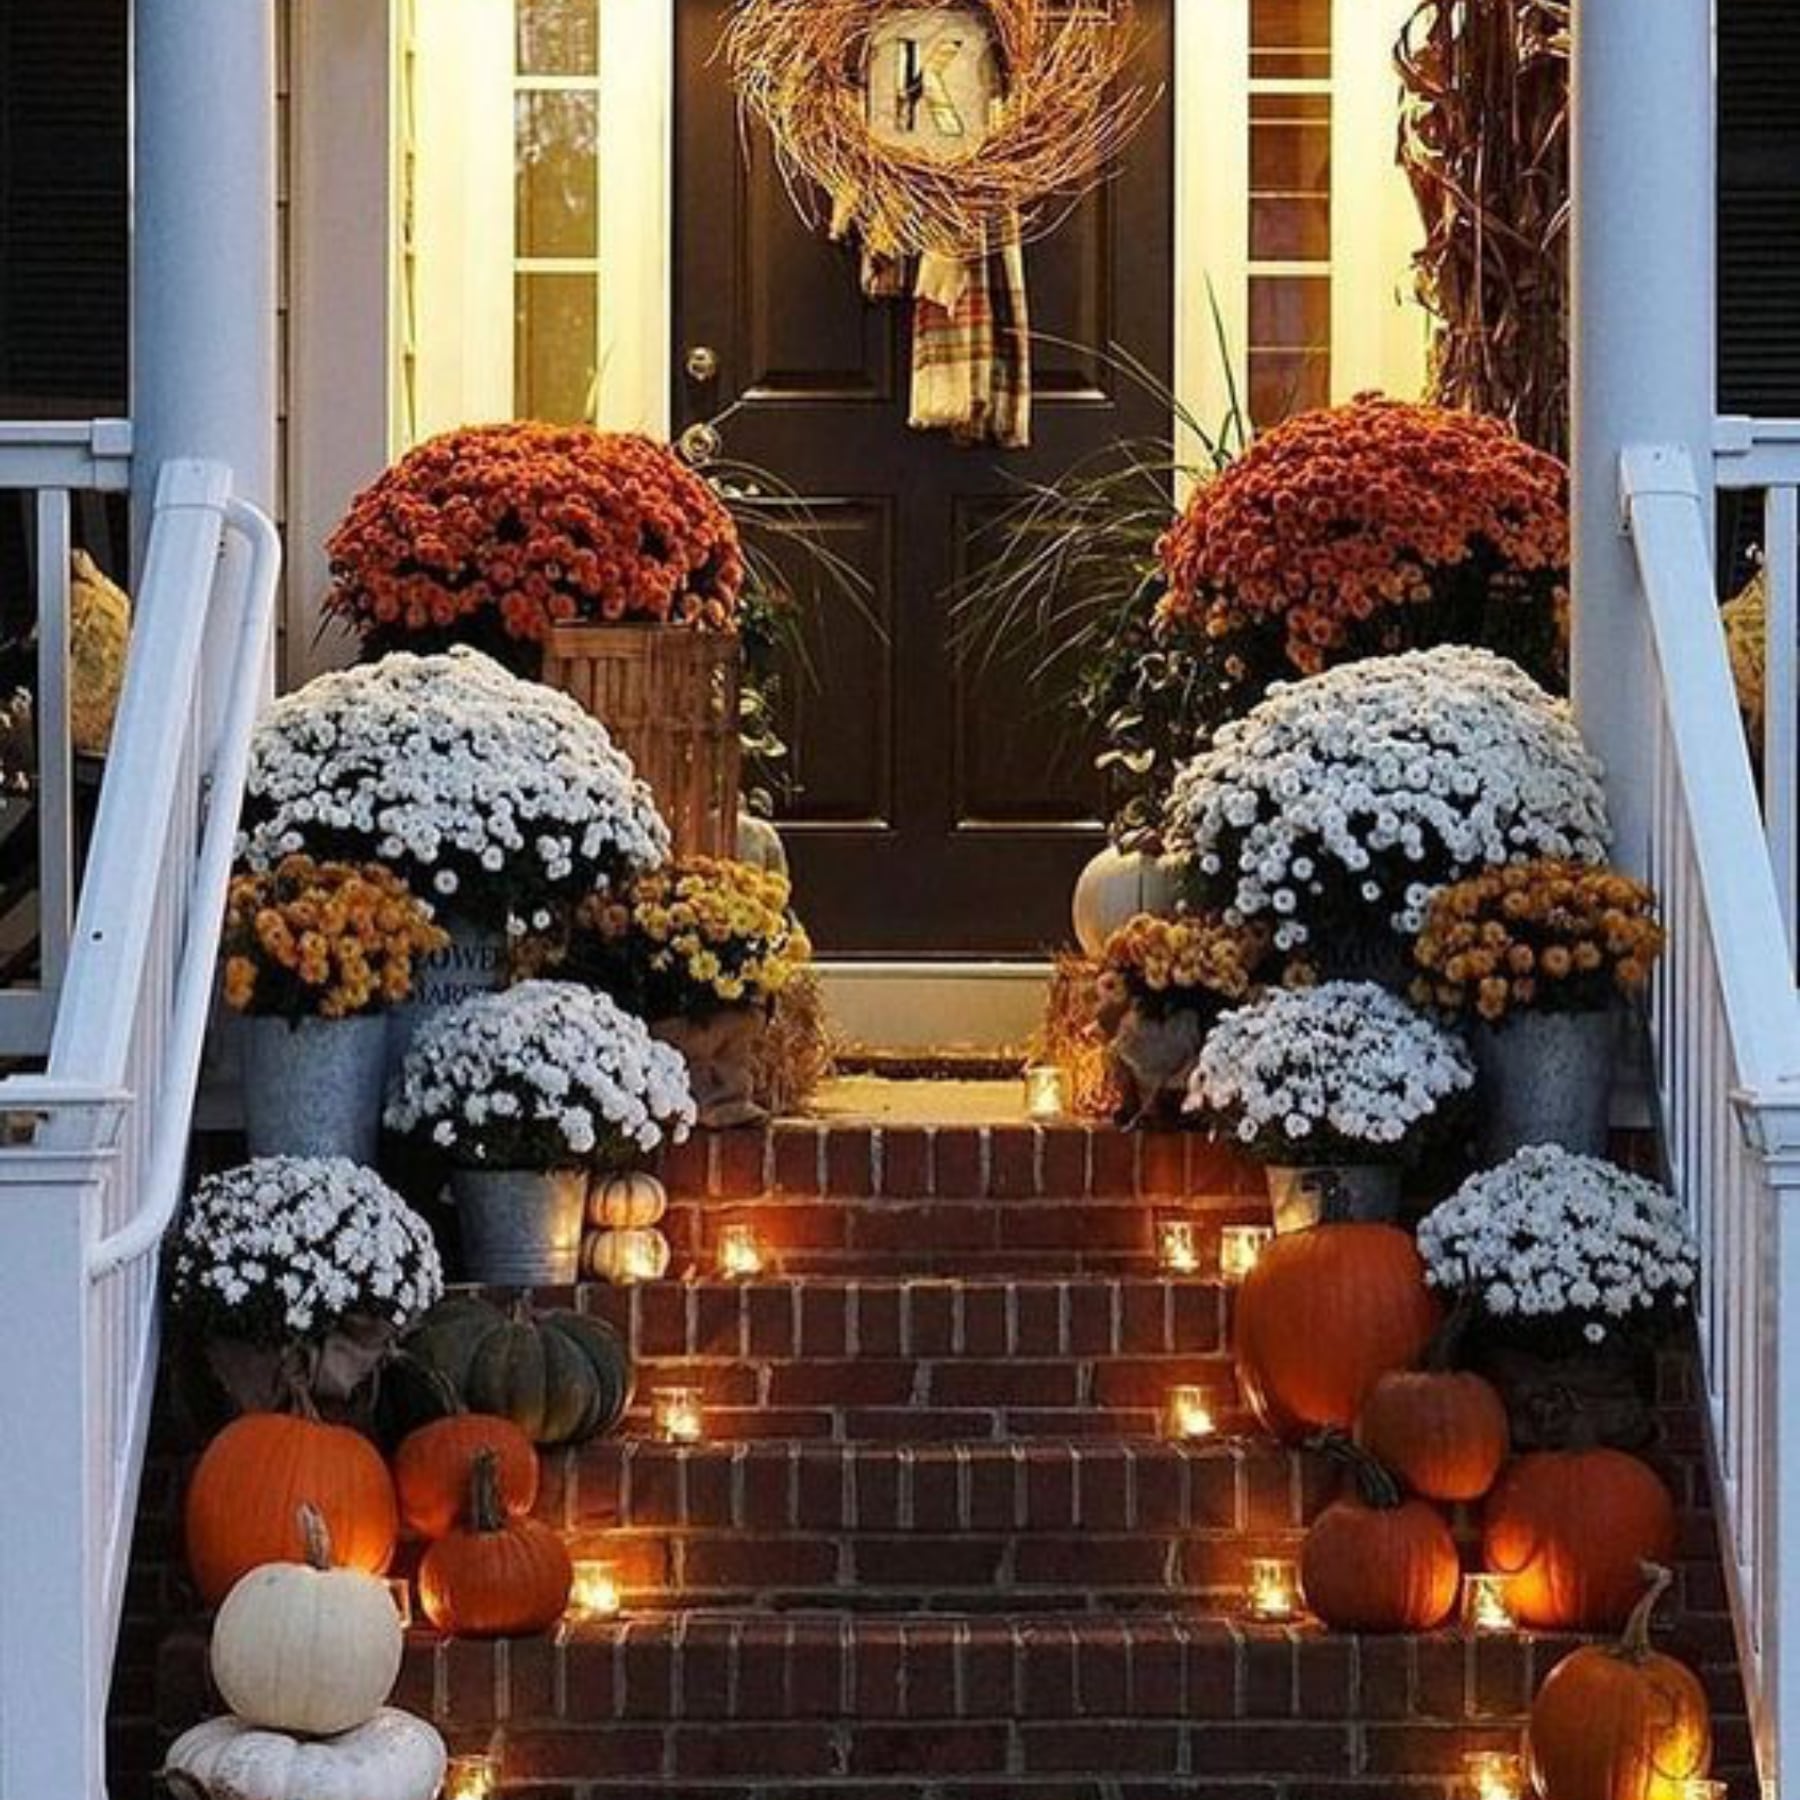 transform your entryway into an enchanting walkway with softly glowing